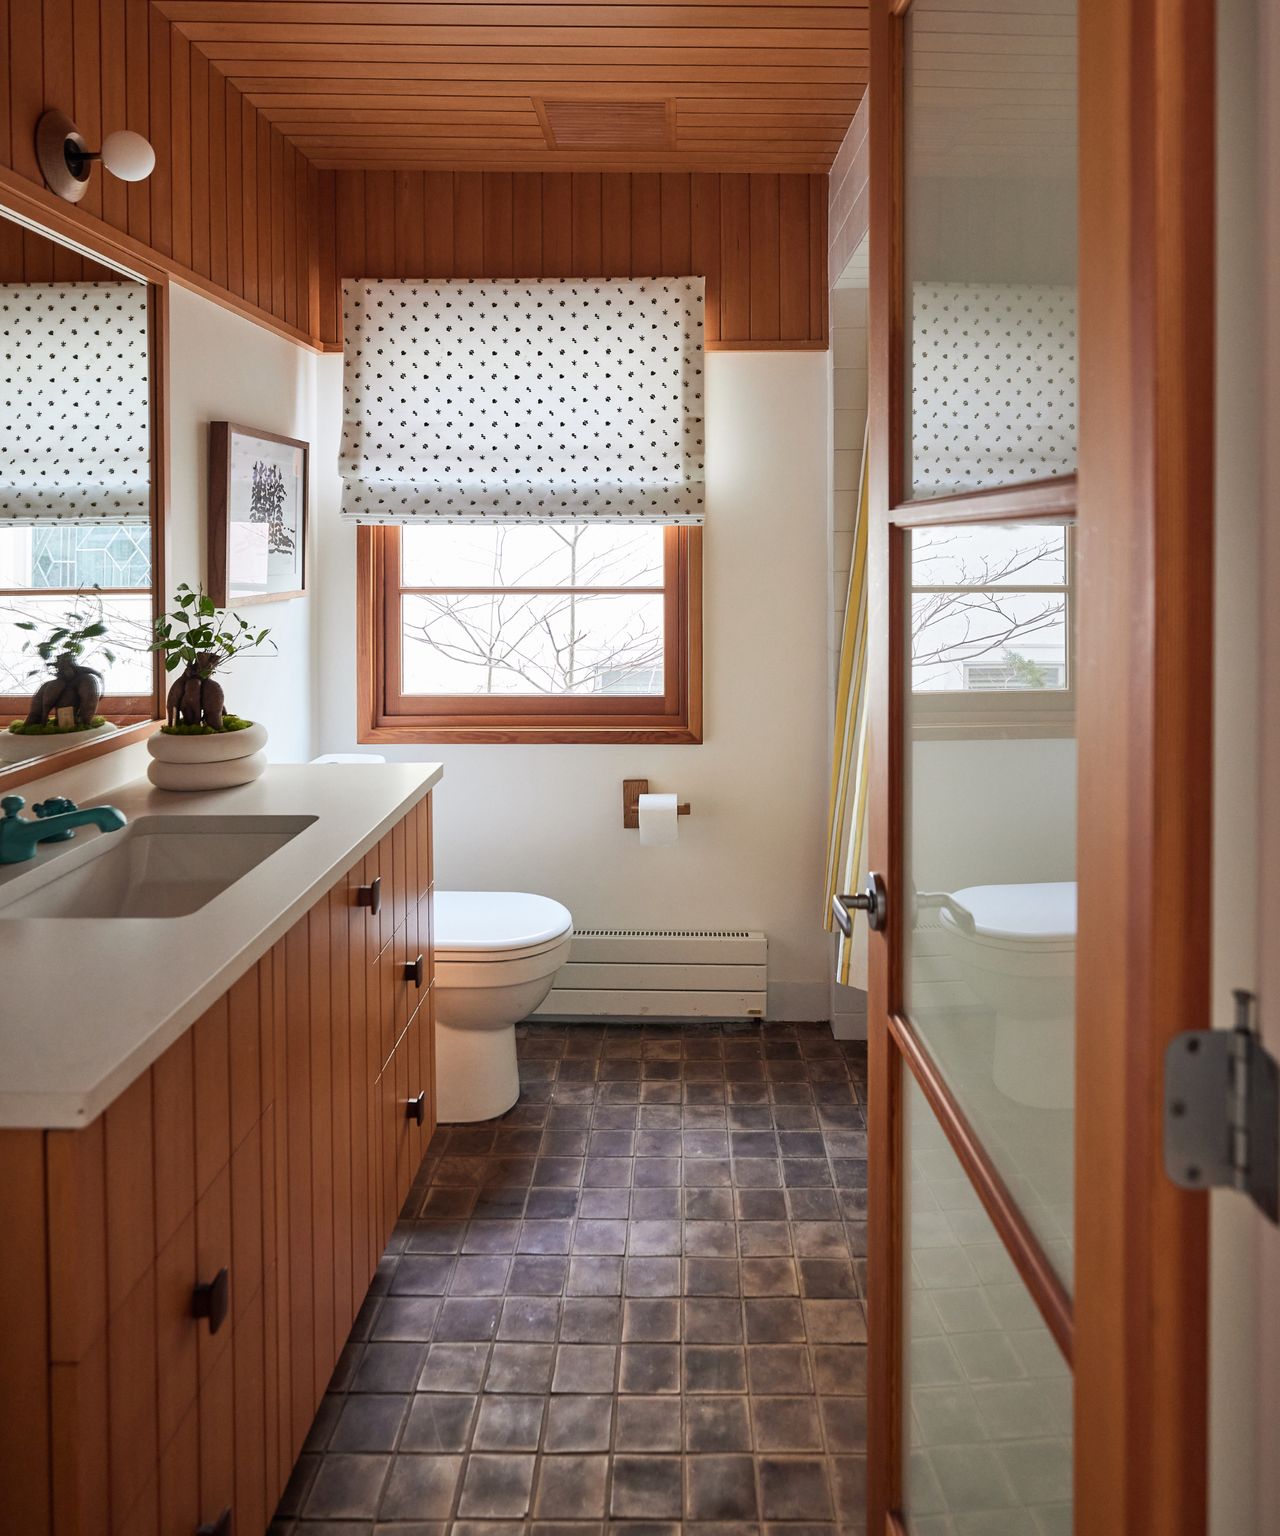 10 narrow bathroom ideas: be inspired by these beautiful designs